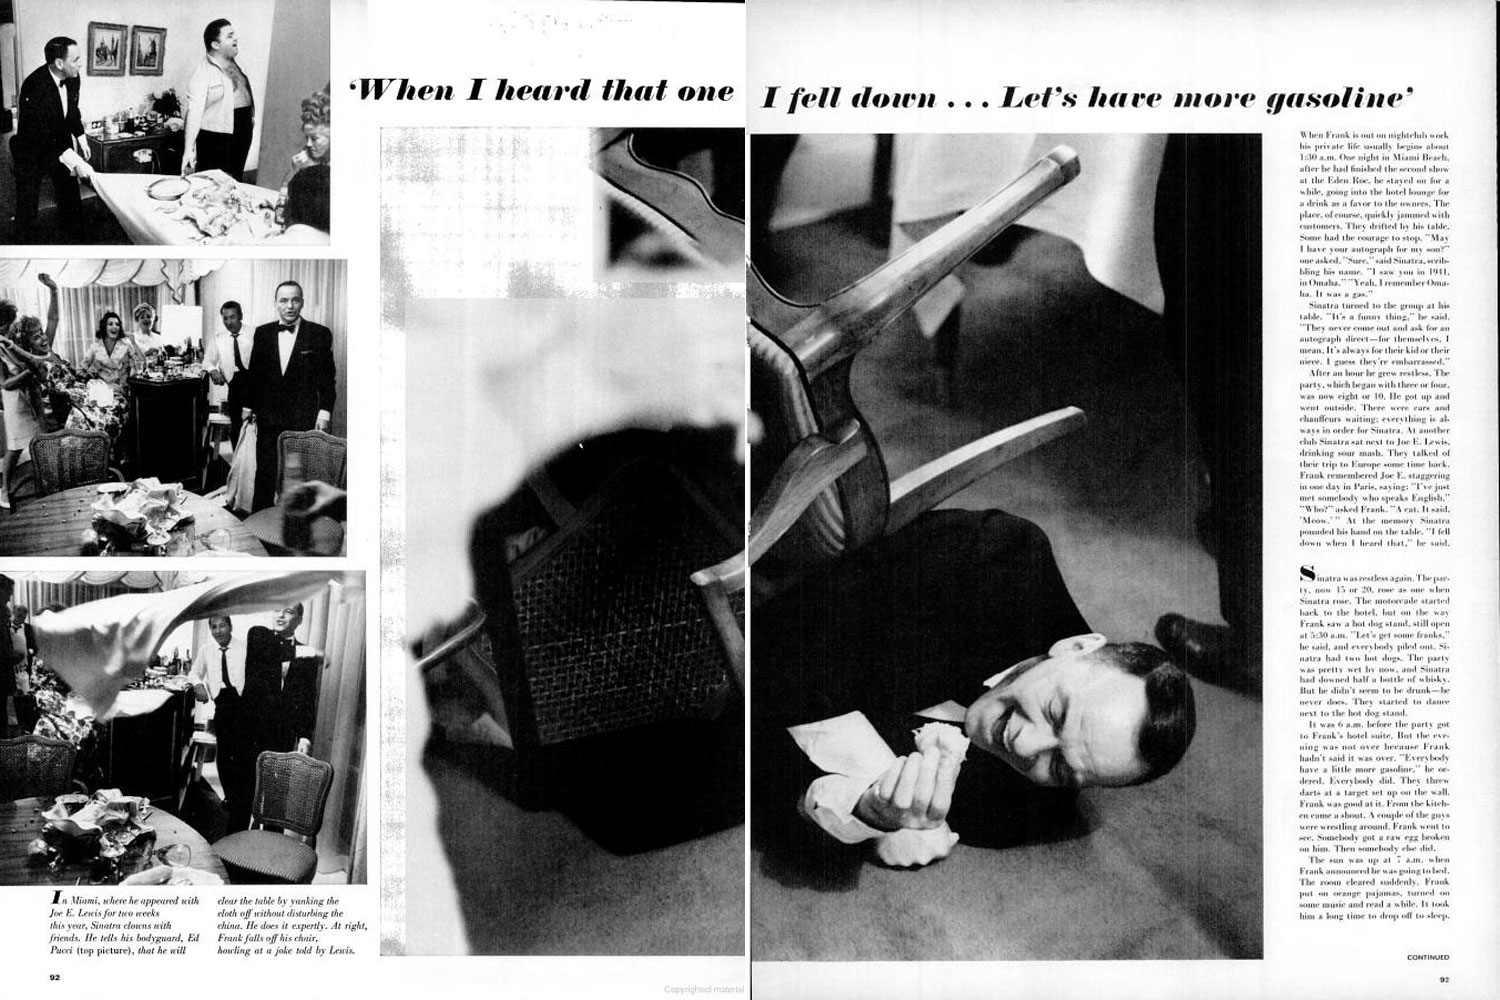 Page spreads for Frank Sinatra feature, LIFE magazine, April 23, 1965.